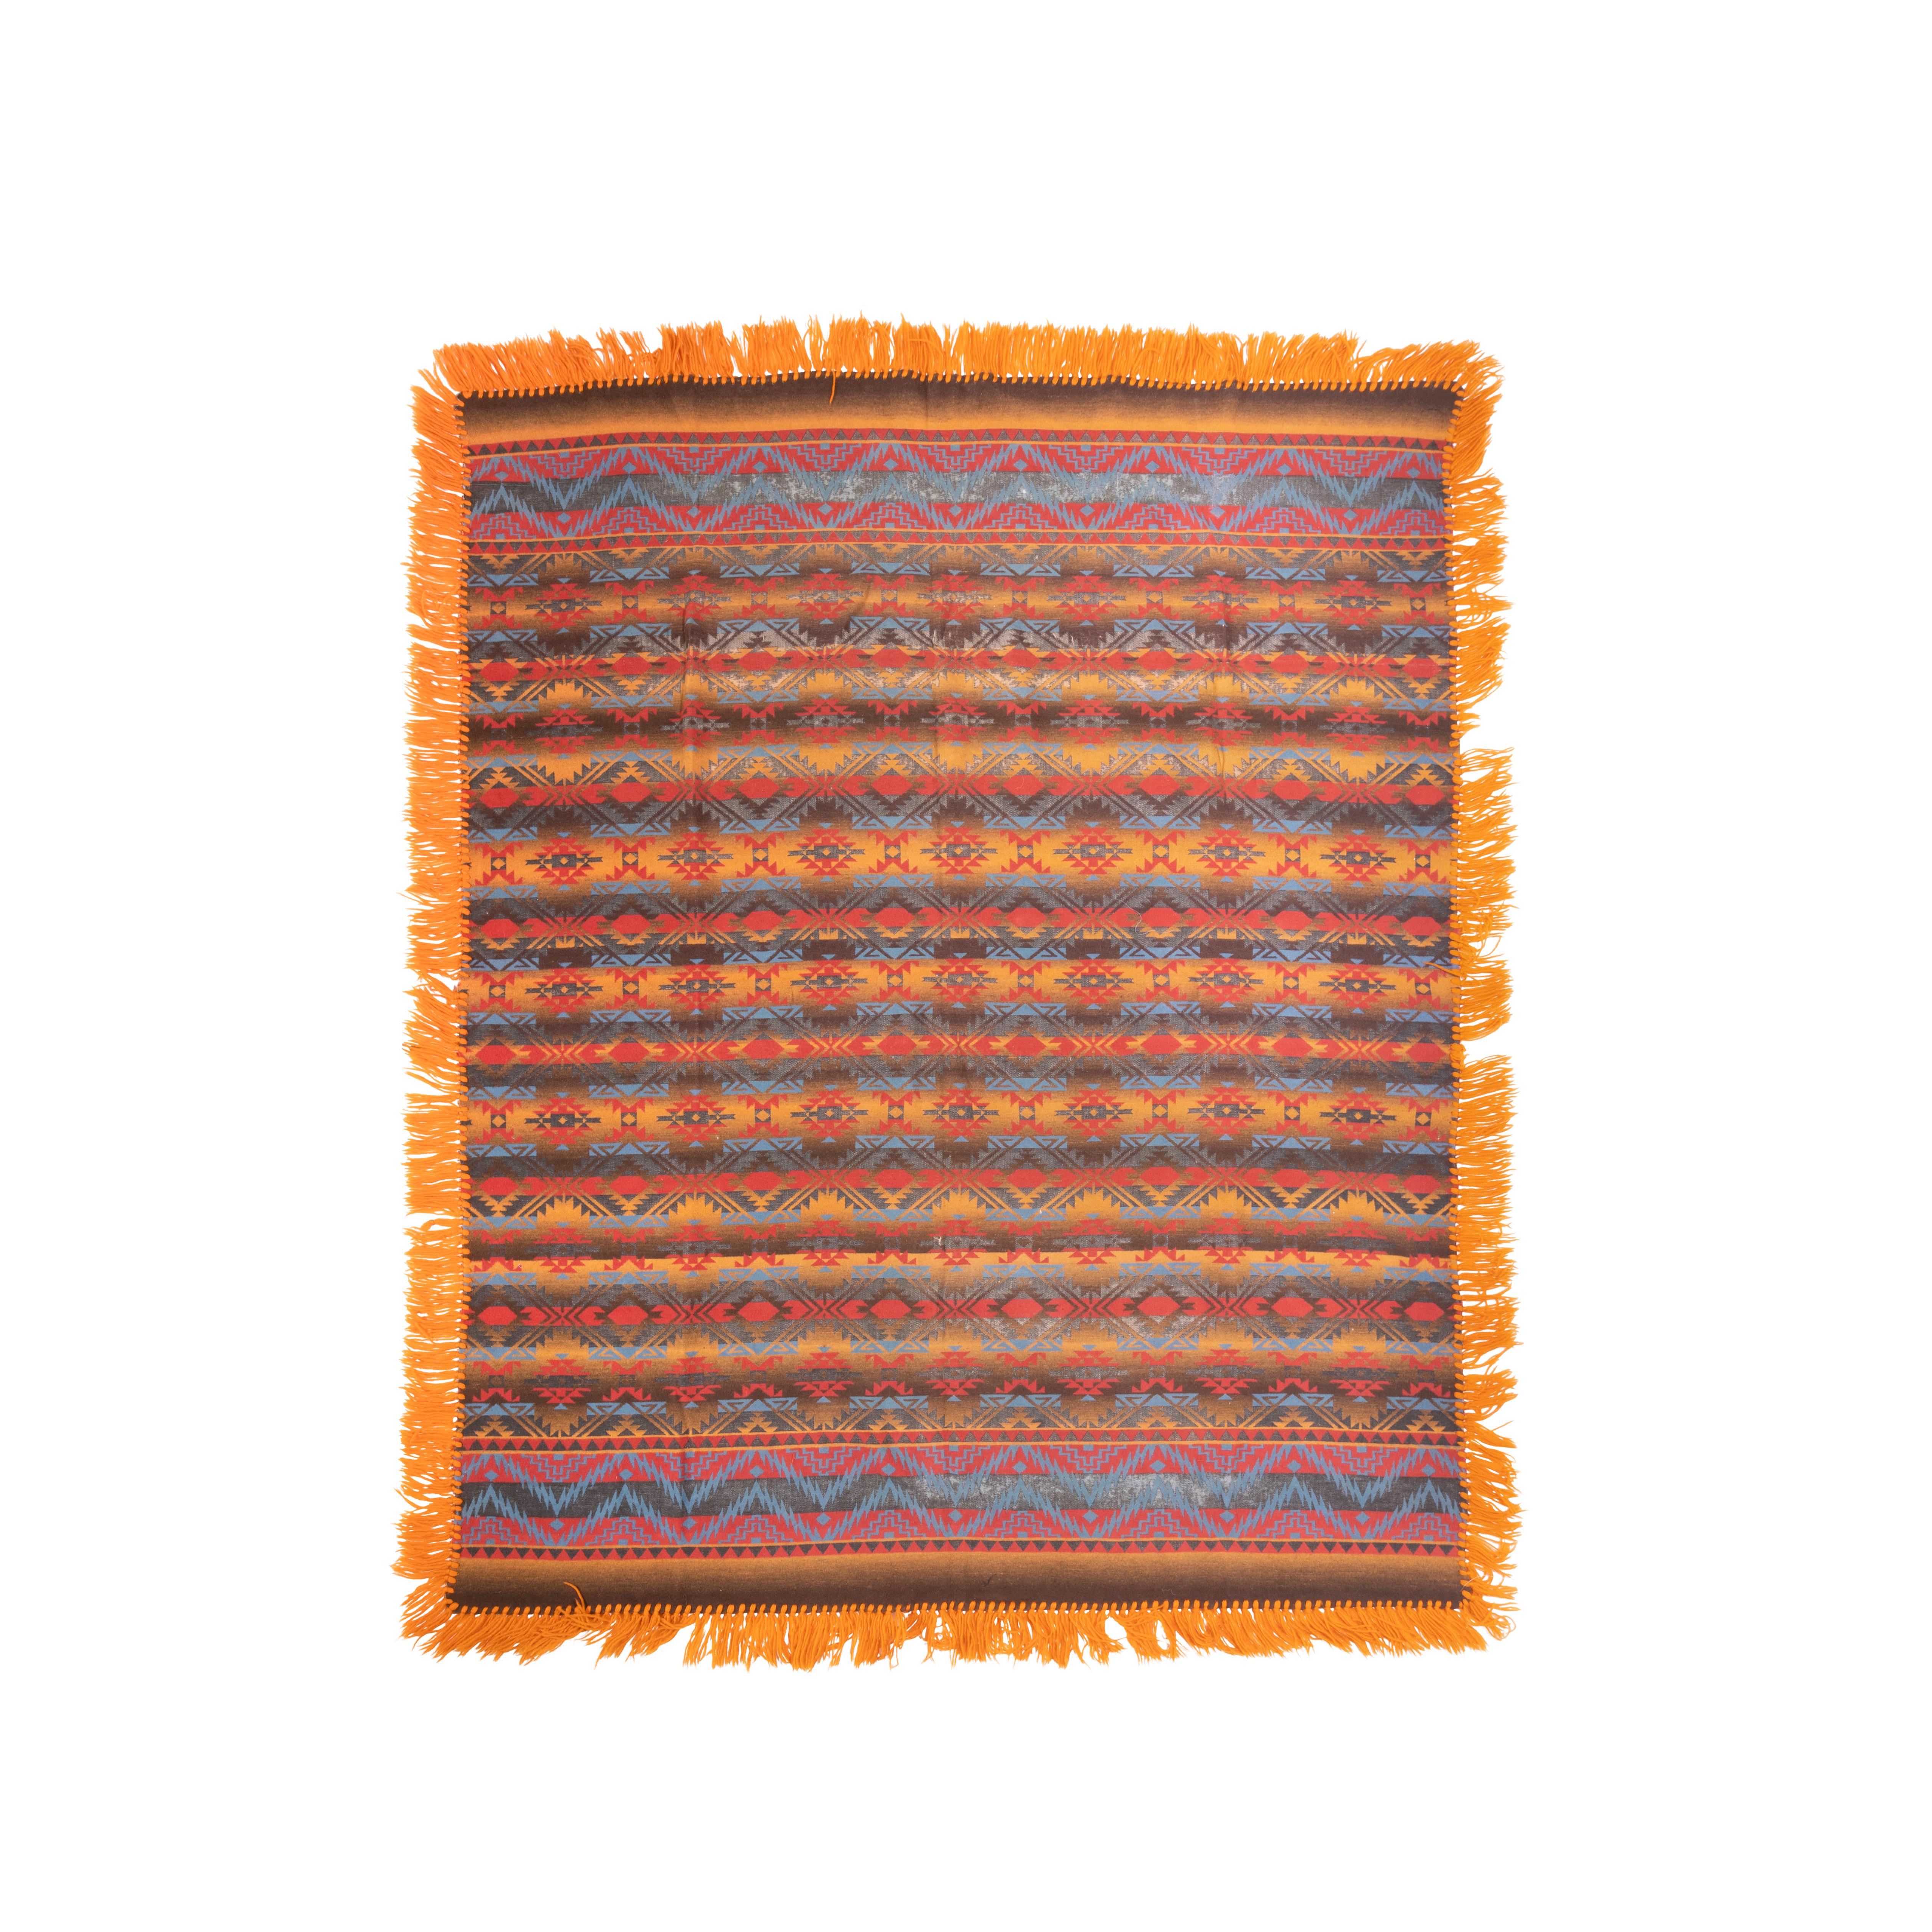 American Fringed Cotton Beacon Blanket, circa 1920 For Sale